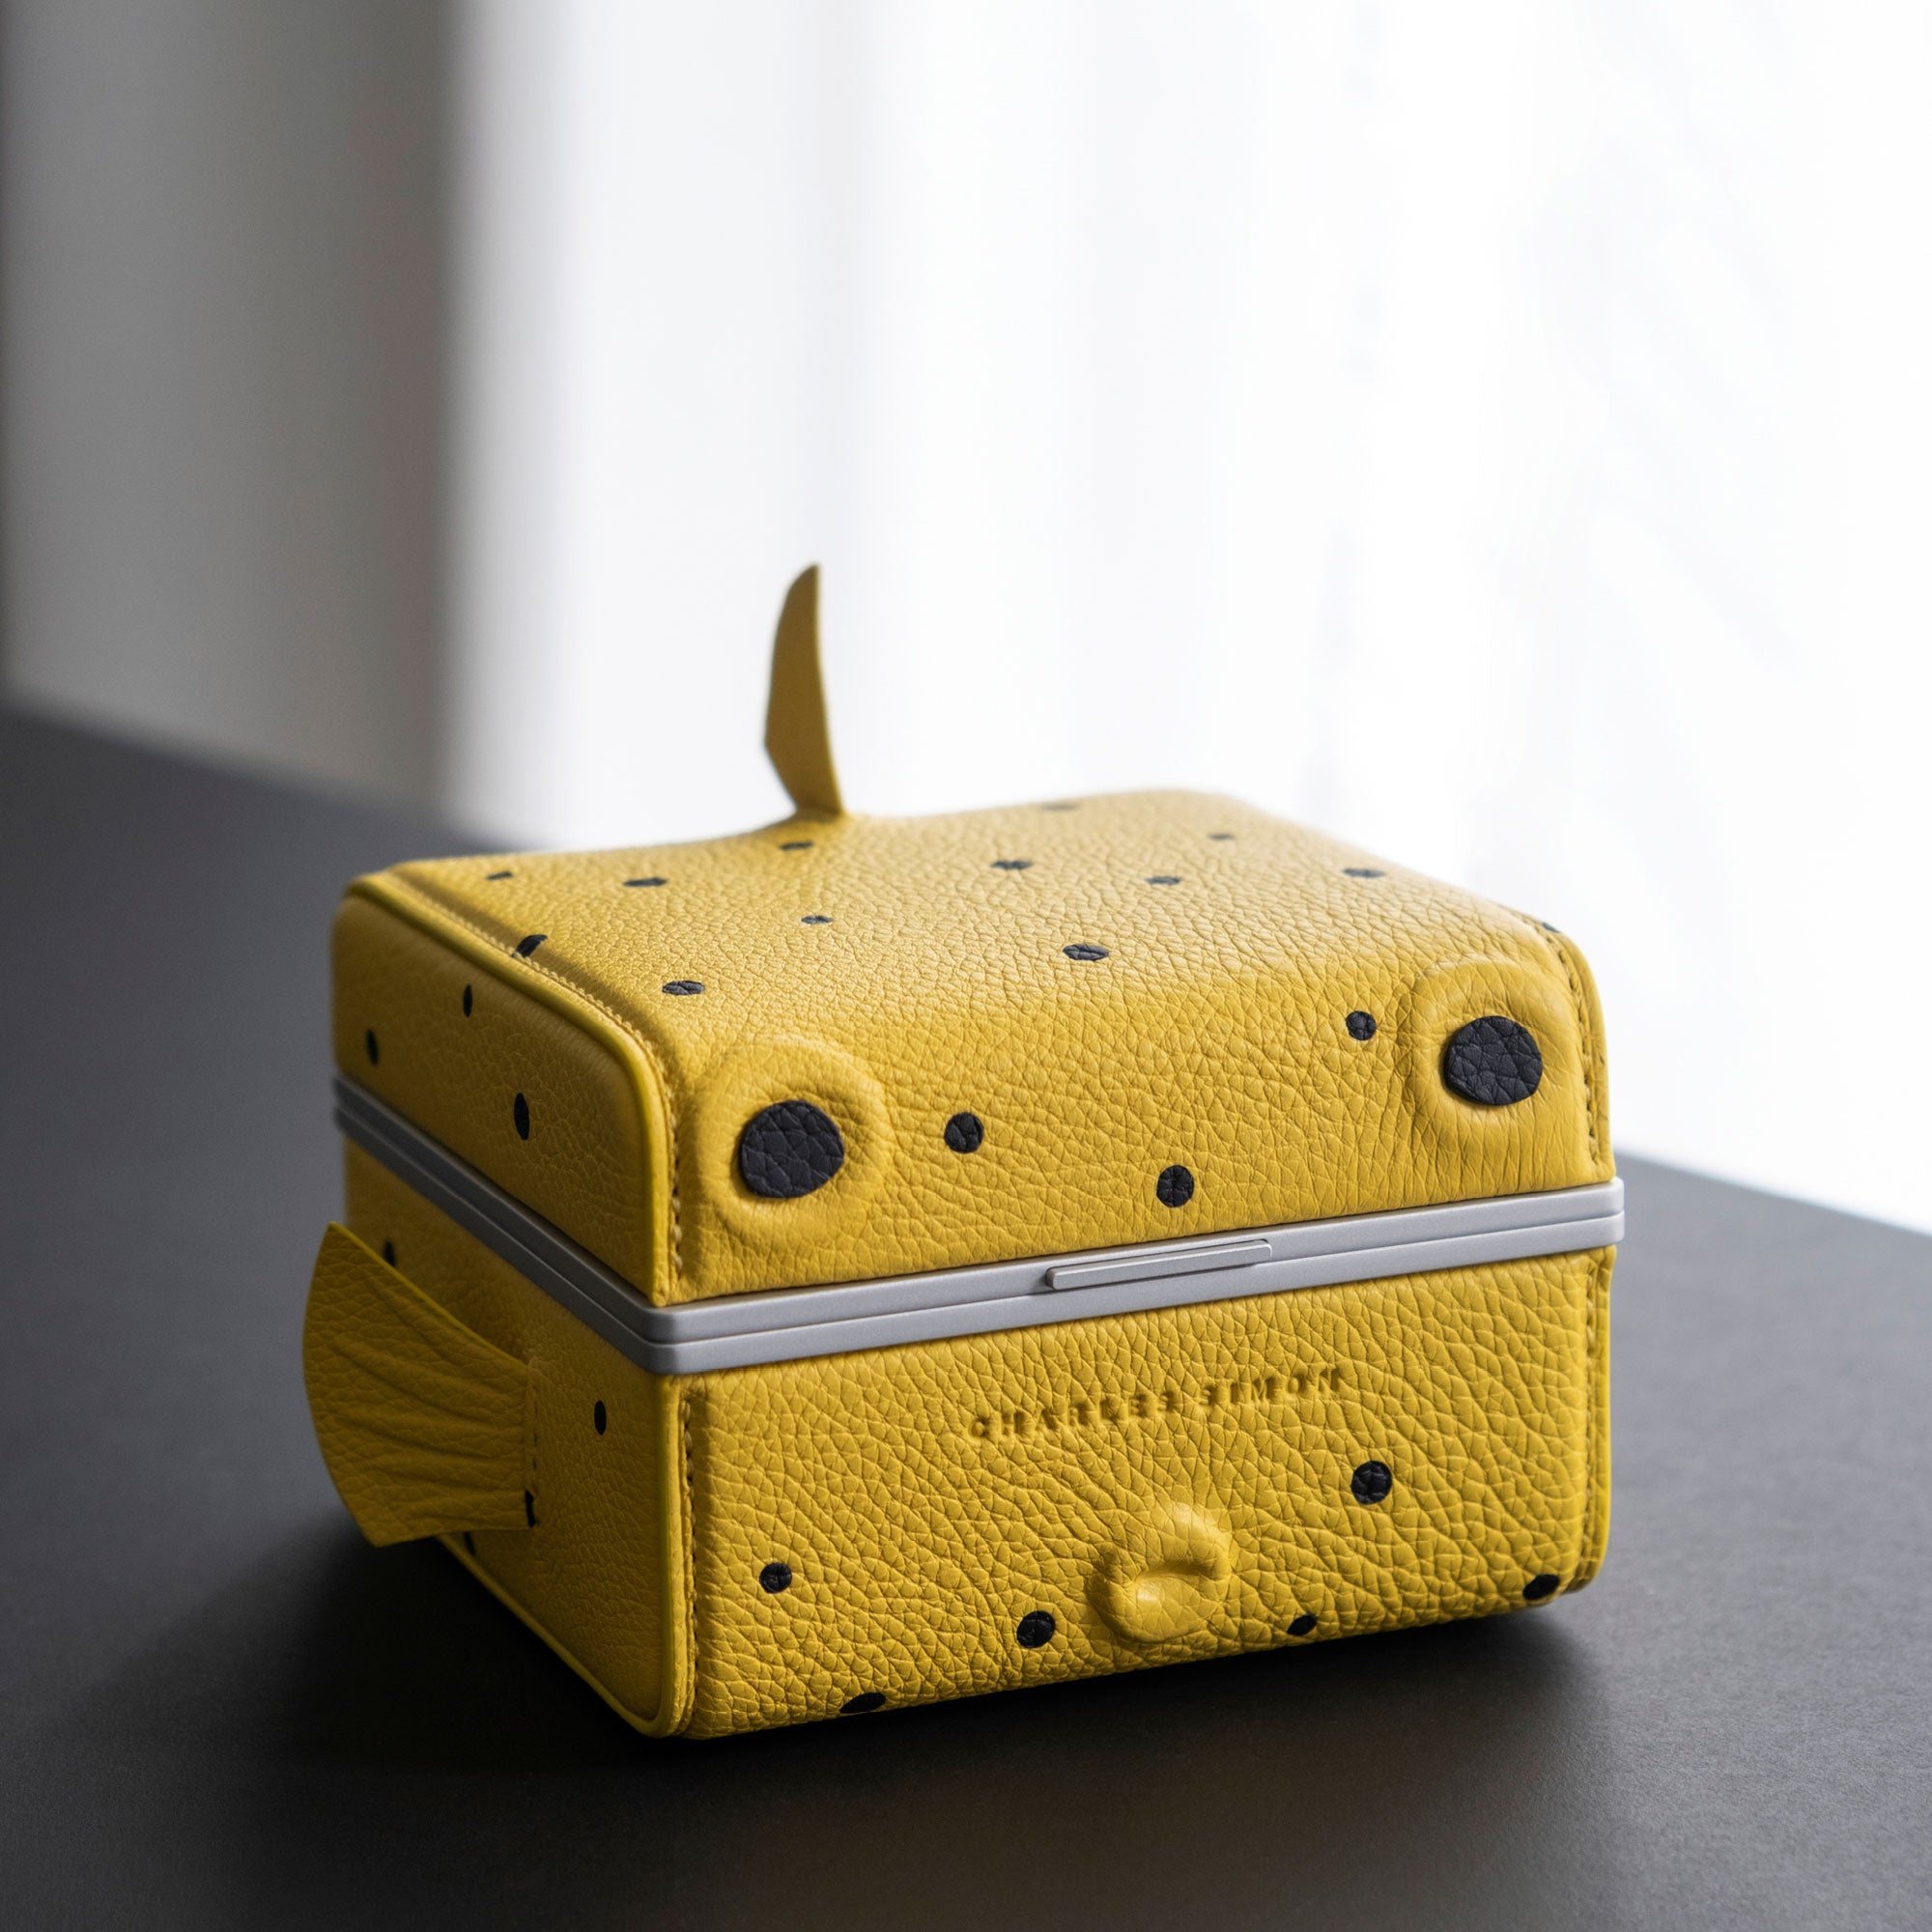 EATON 1 WATCH CASE SPECIAL EDITION - YELLOW BOXFISH